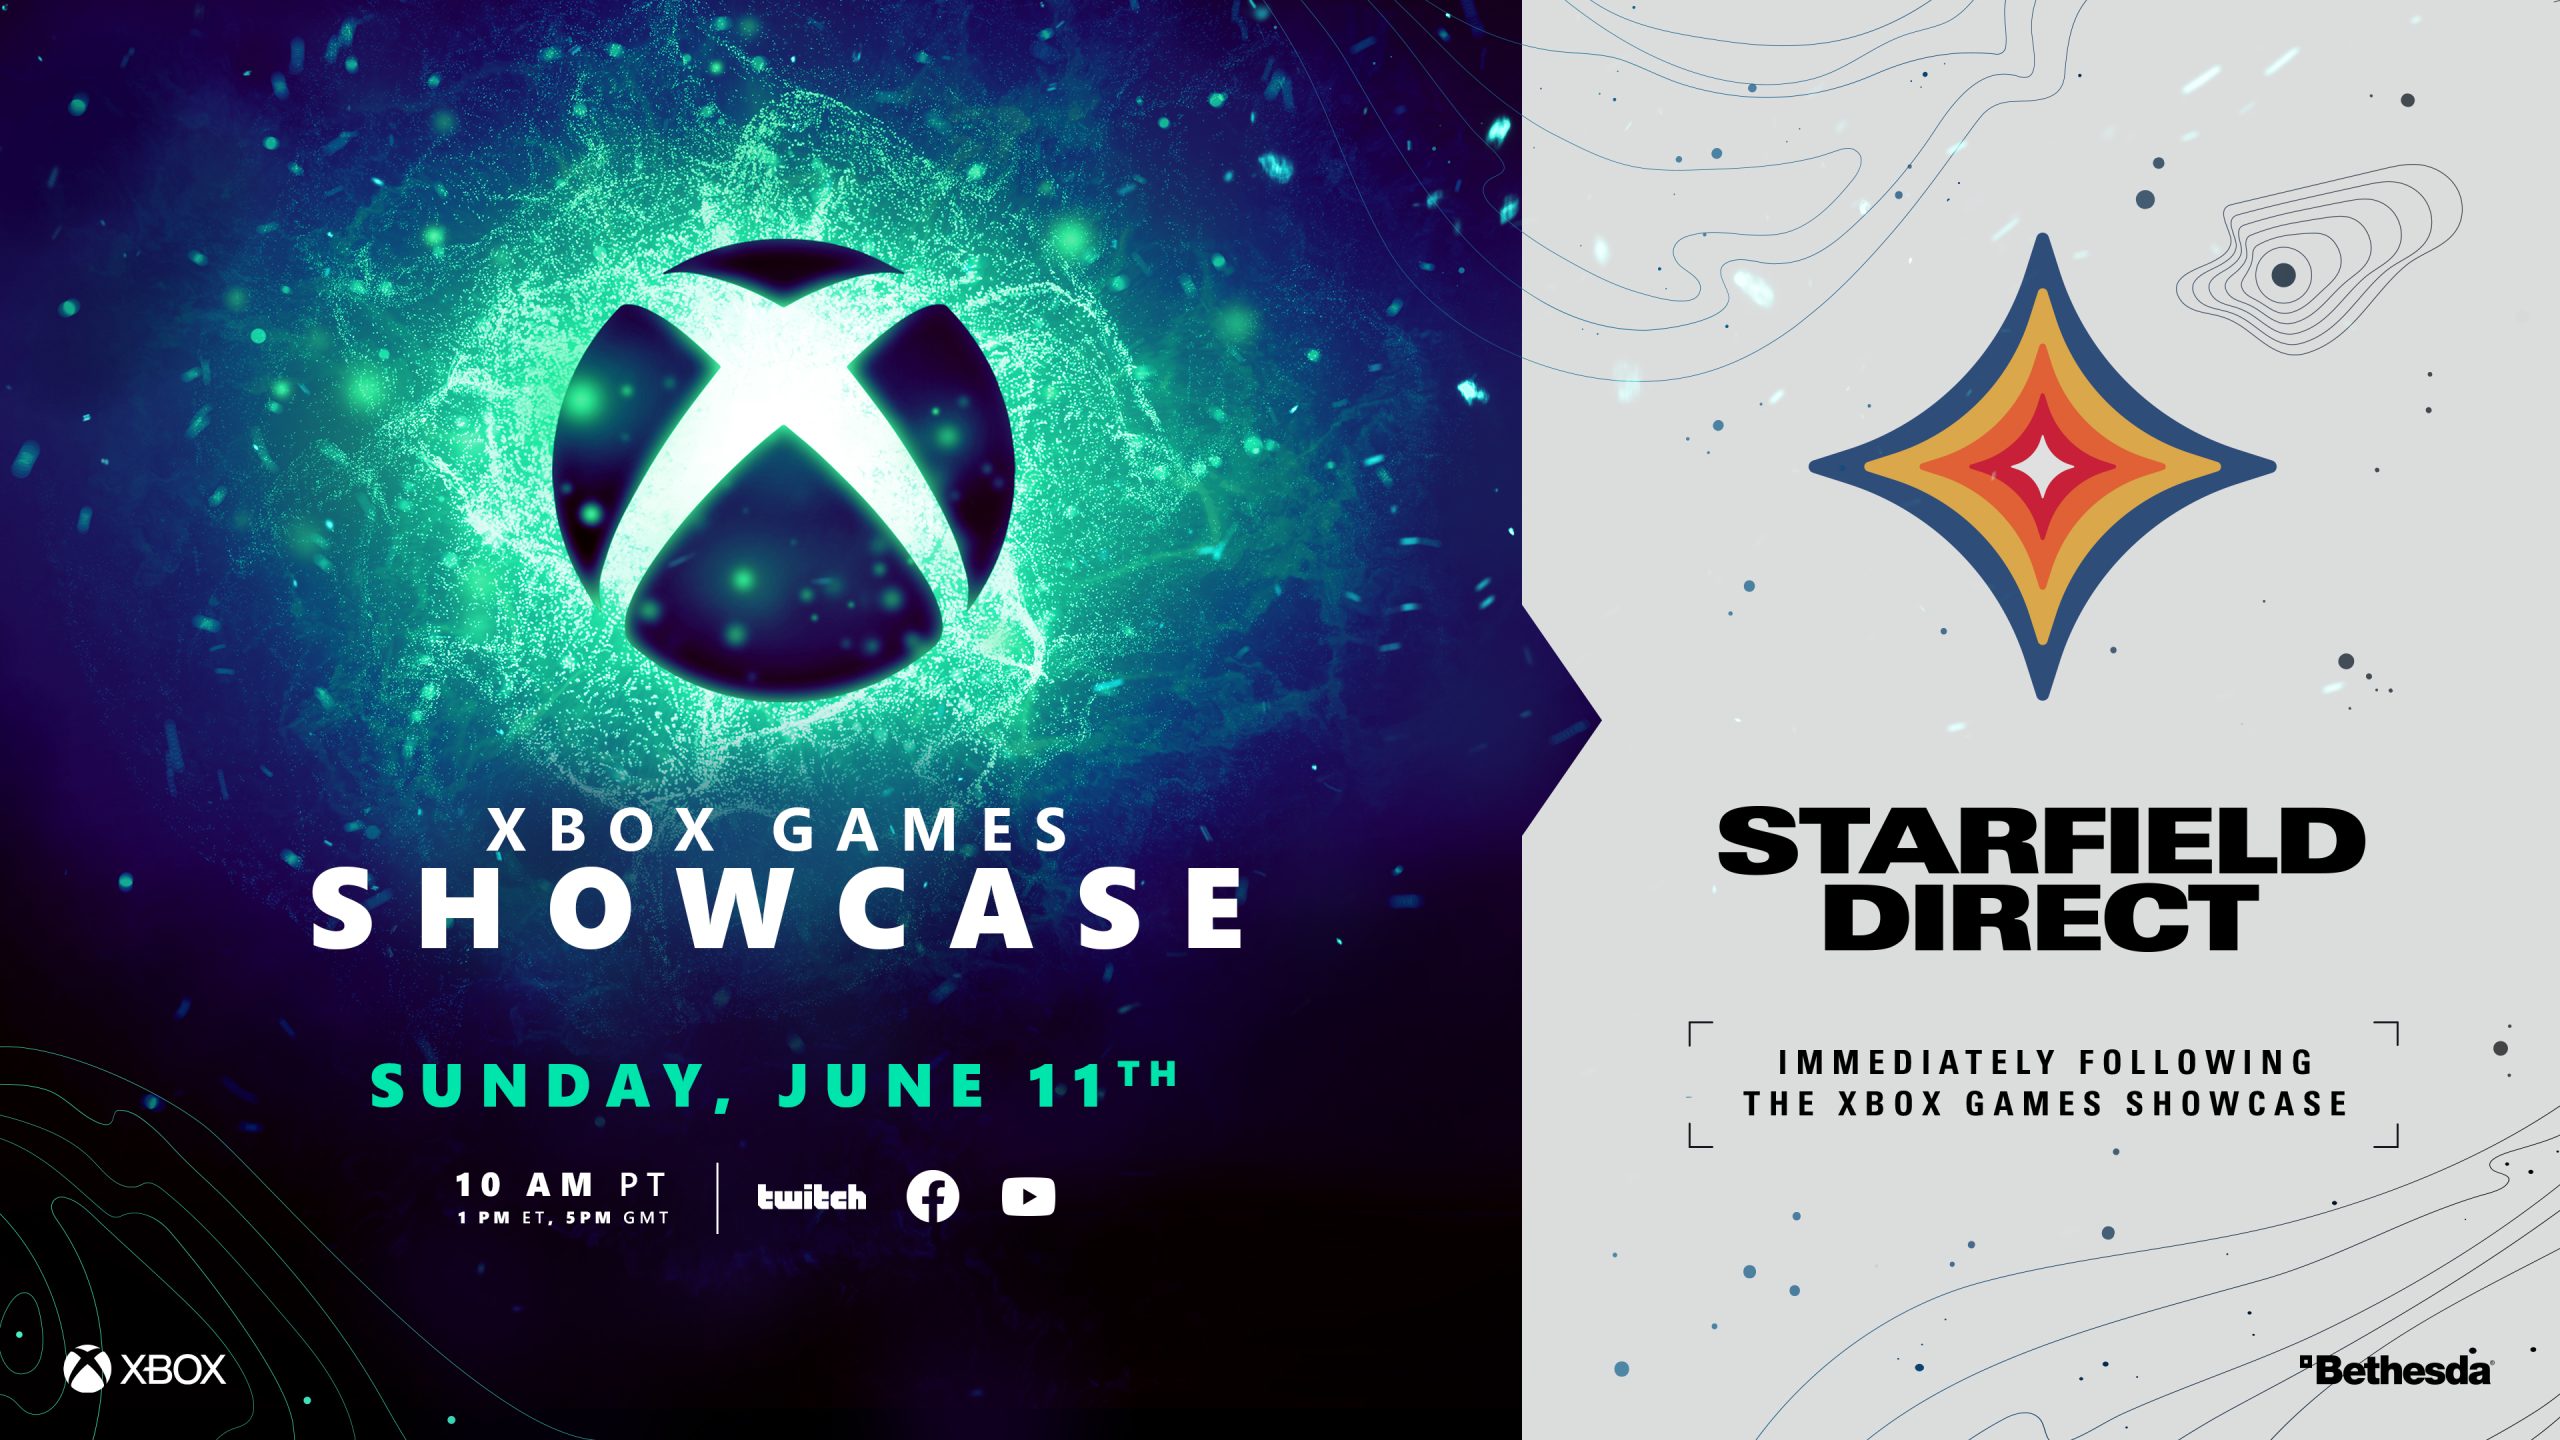 A graphic promoting Xbox Games Showcase on June 11 at 10 am PT, and the Starfield Direct immediately following it.